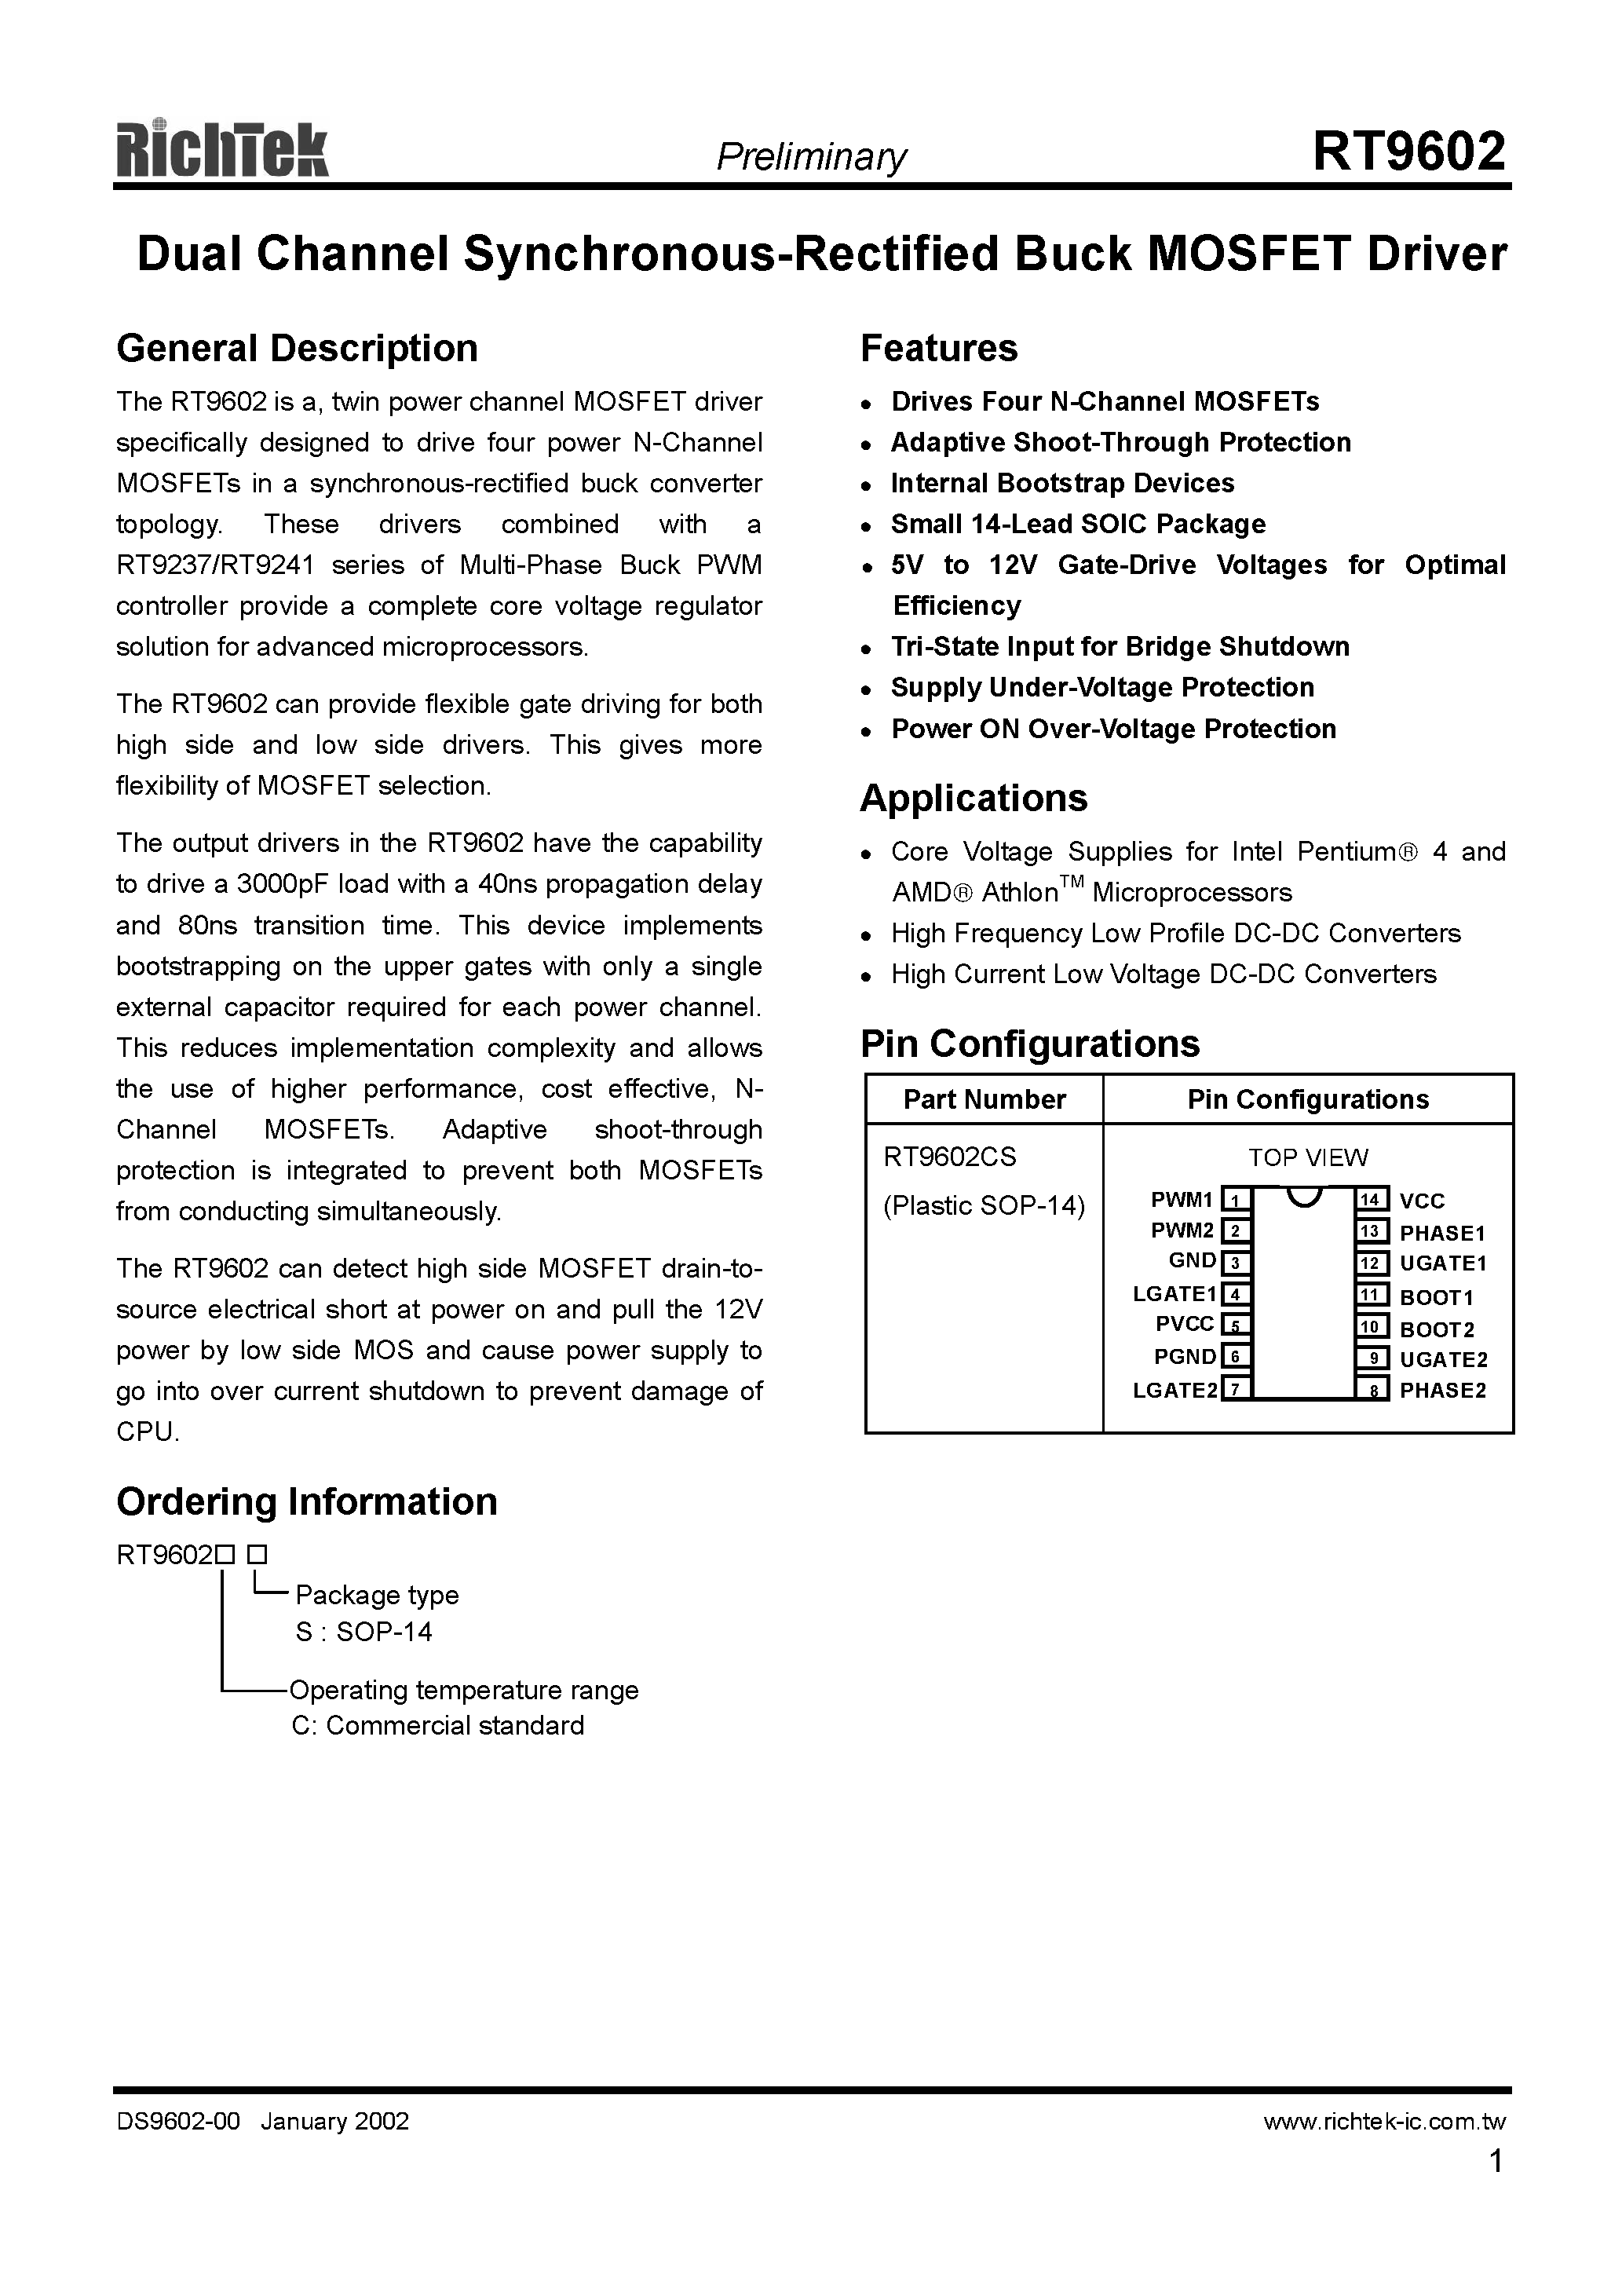 Datasheet RT9602 - DUAL CHANNEL SYNCHRONOUS-RECTIFIED BUCK MOSFET DRIVER page 1